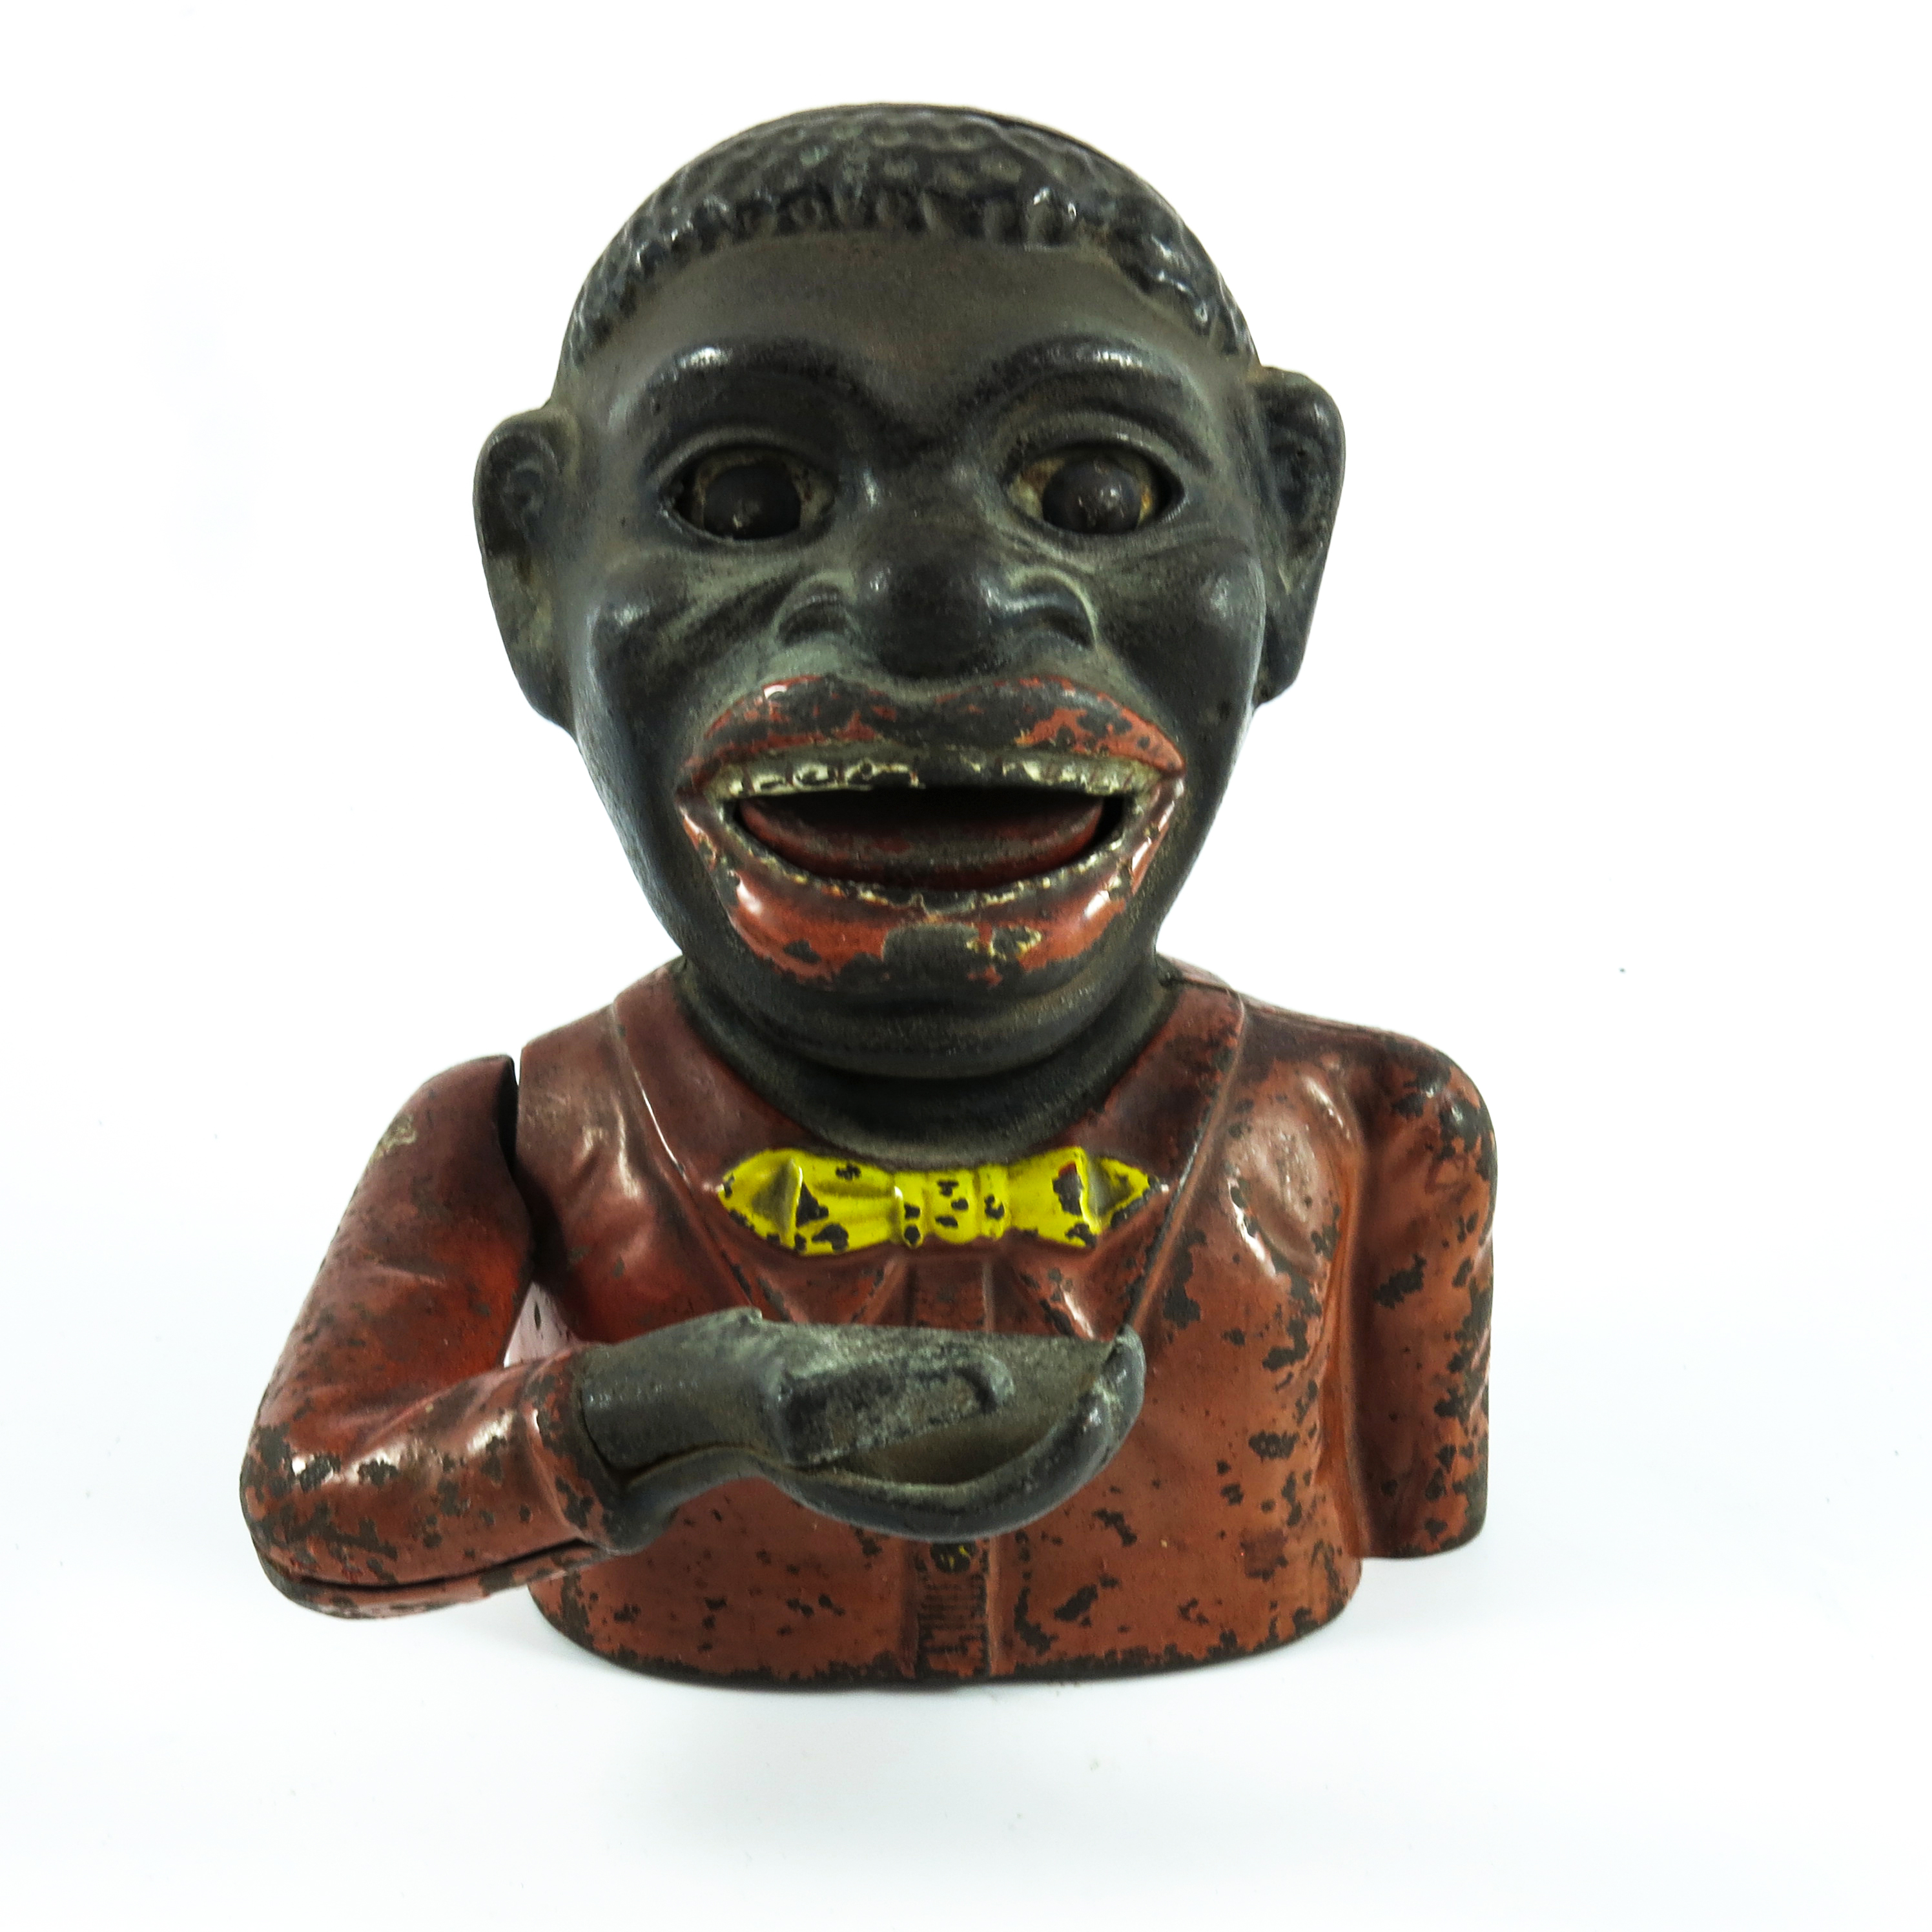 'JOLLY NIGGER' ORIGINAL CAST IRON MECHANICAL MONEY BOX, RED POLYCHROME DECORATION WITH YELLOW BOW - Image 2 of 6